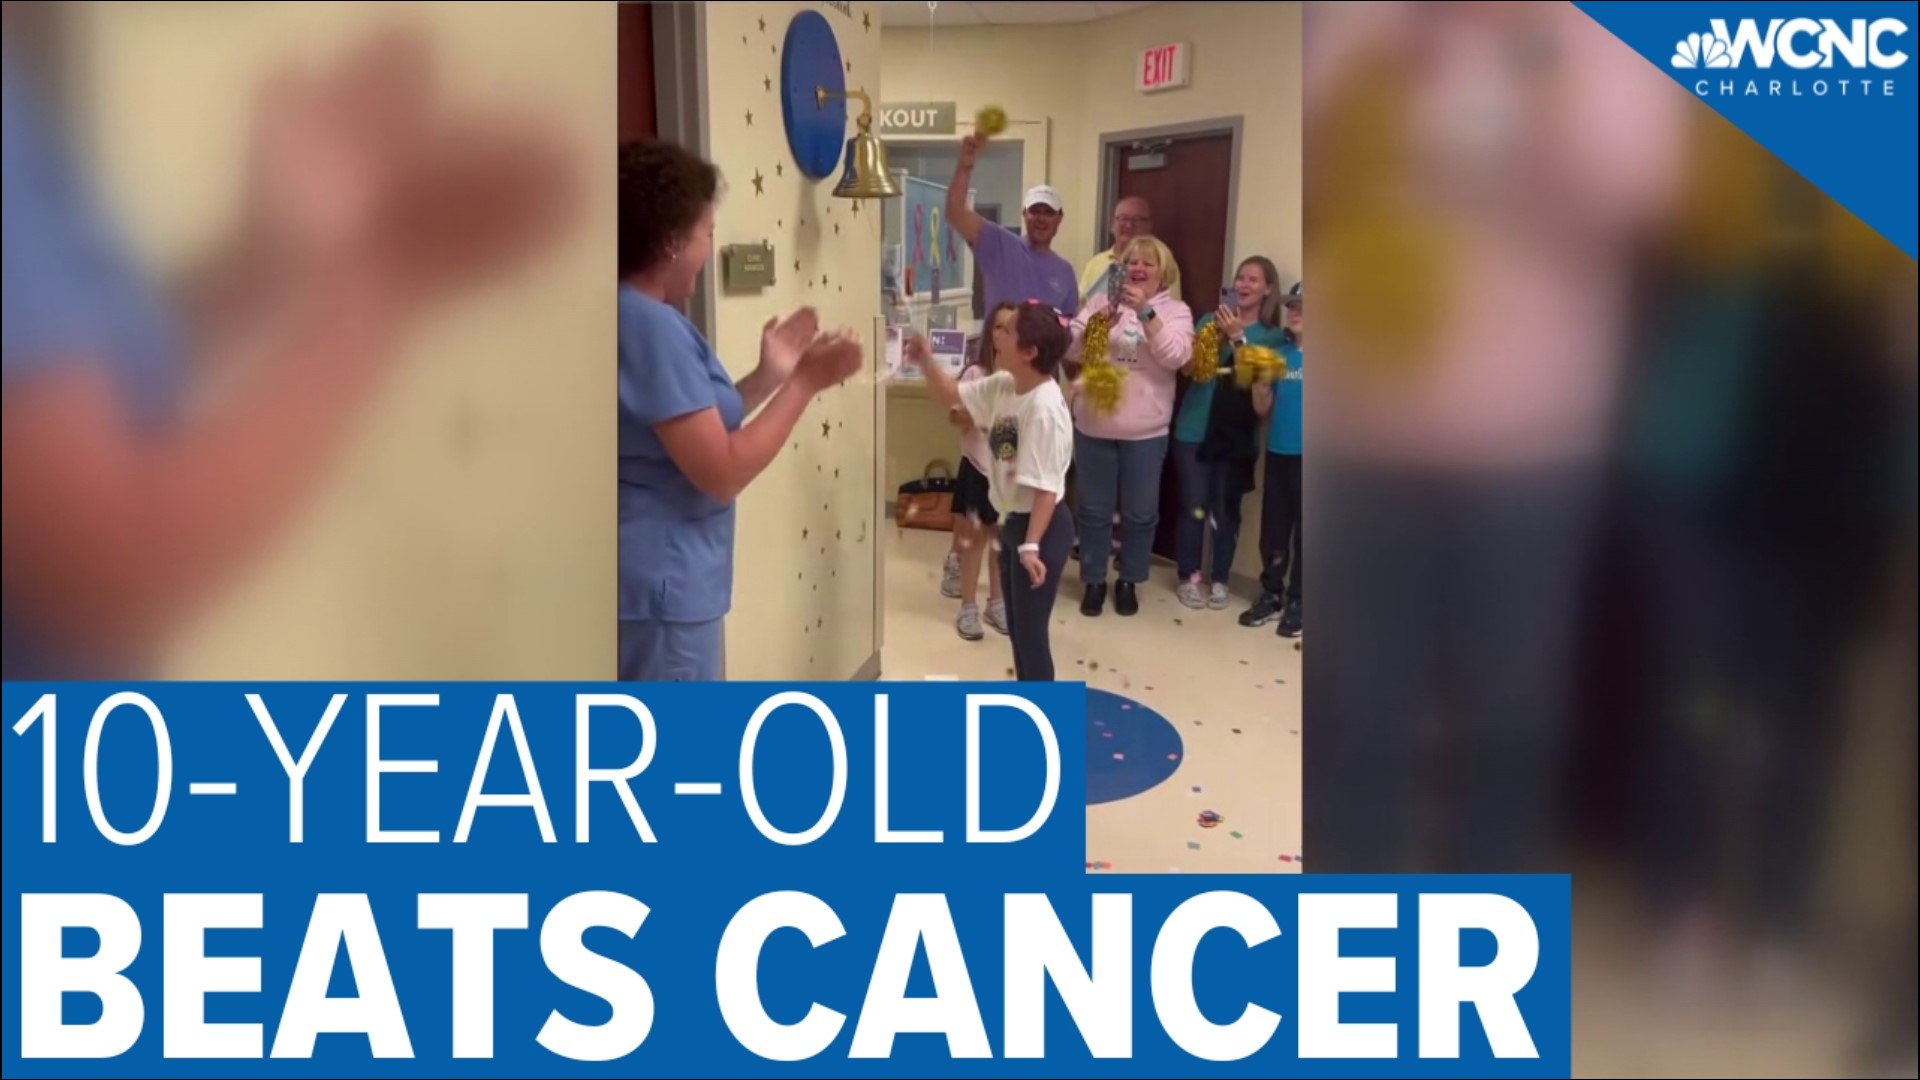 Earlier this month, 10-year-old Olivia Reardon rang the "cancer-free bell" at Novant Health Hemby Children's Hospital after over a year of treatment.